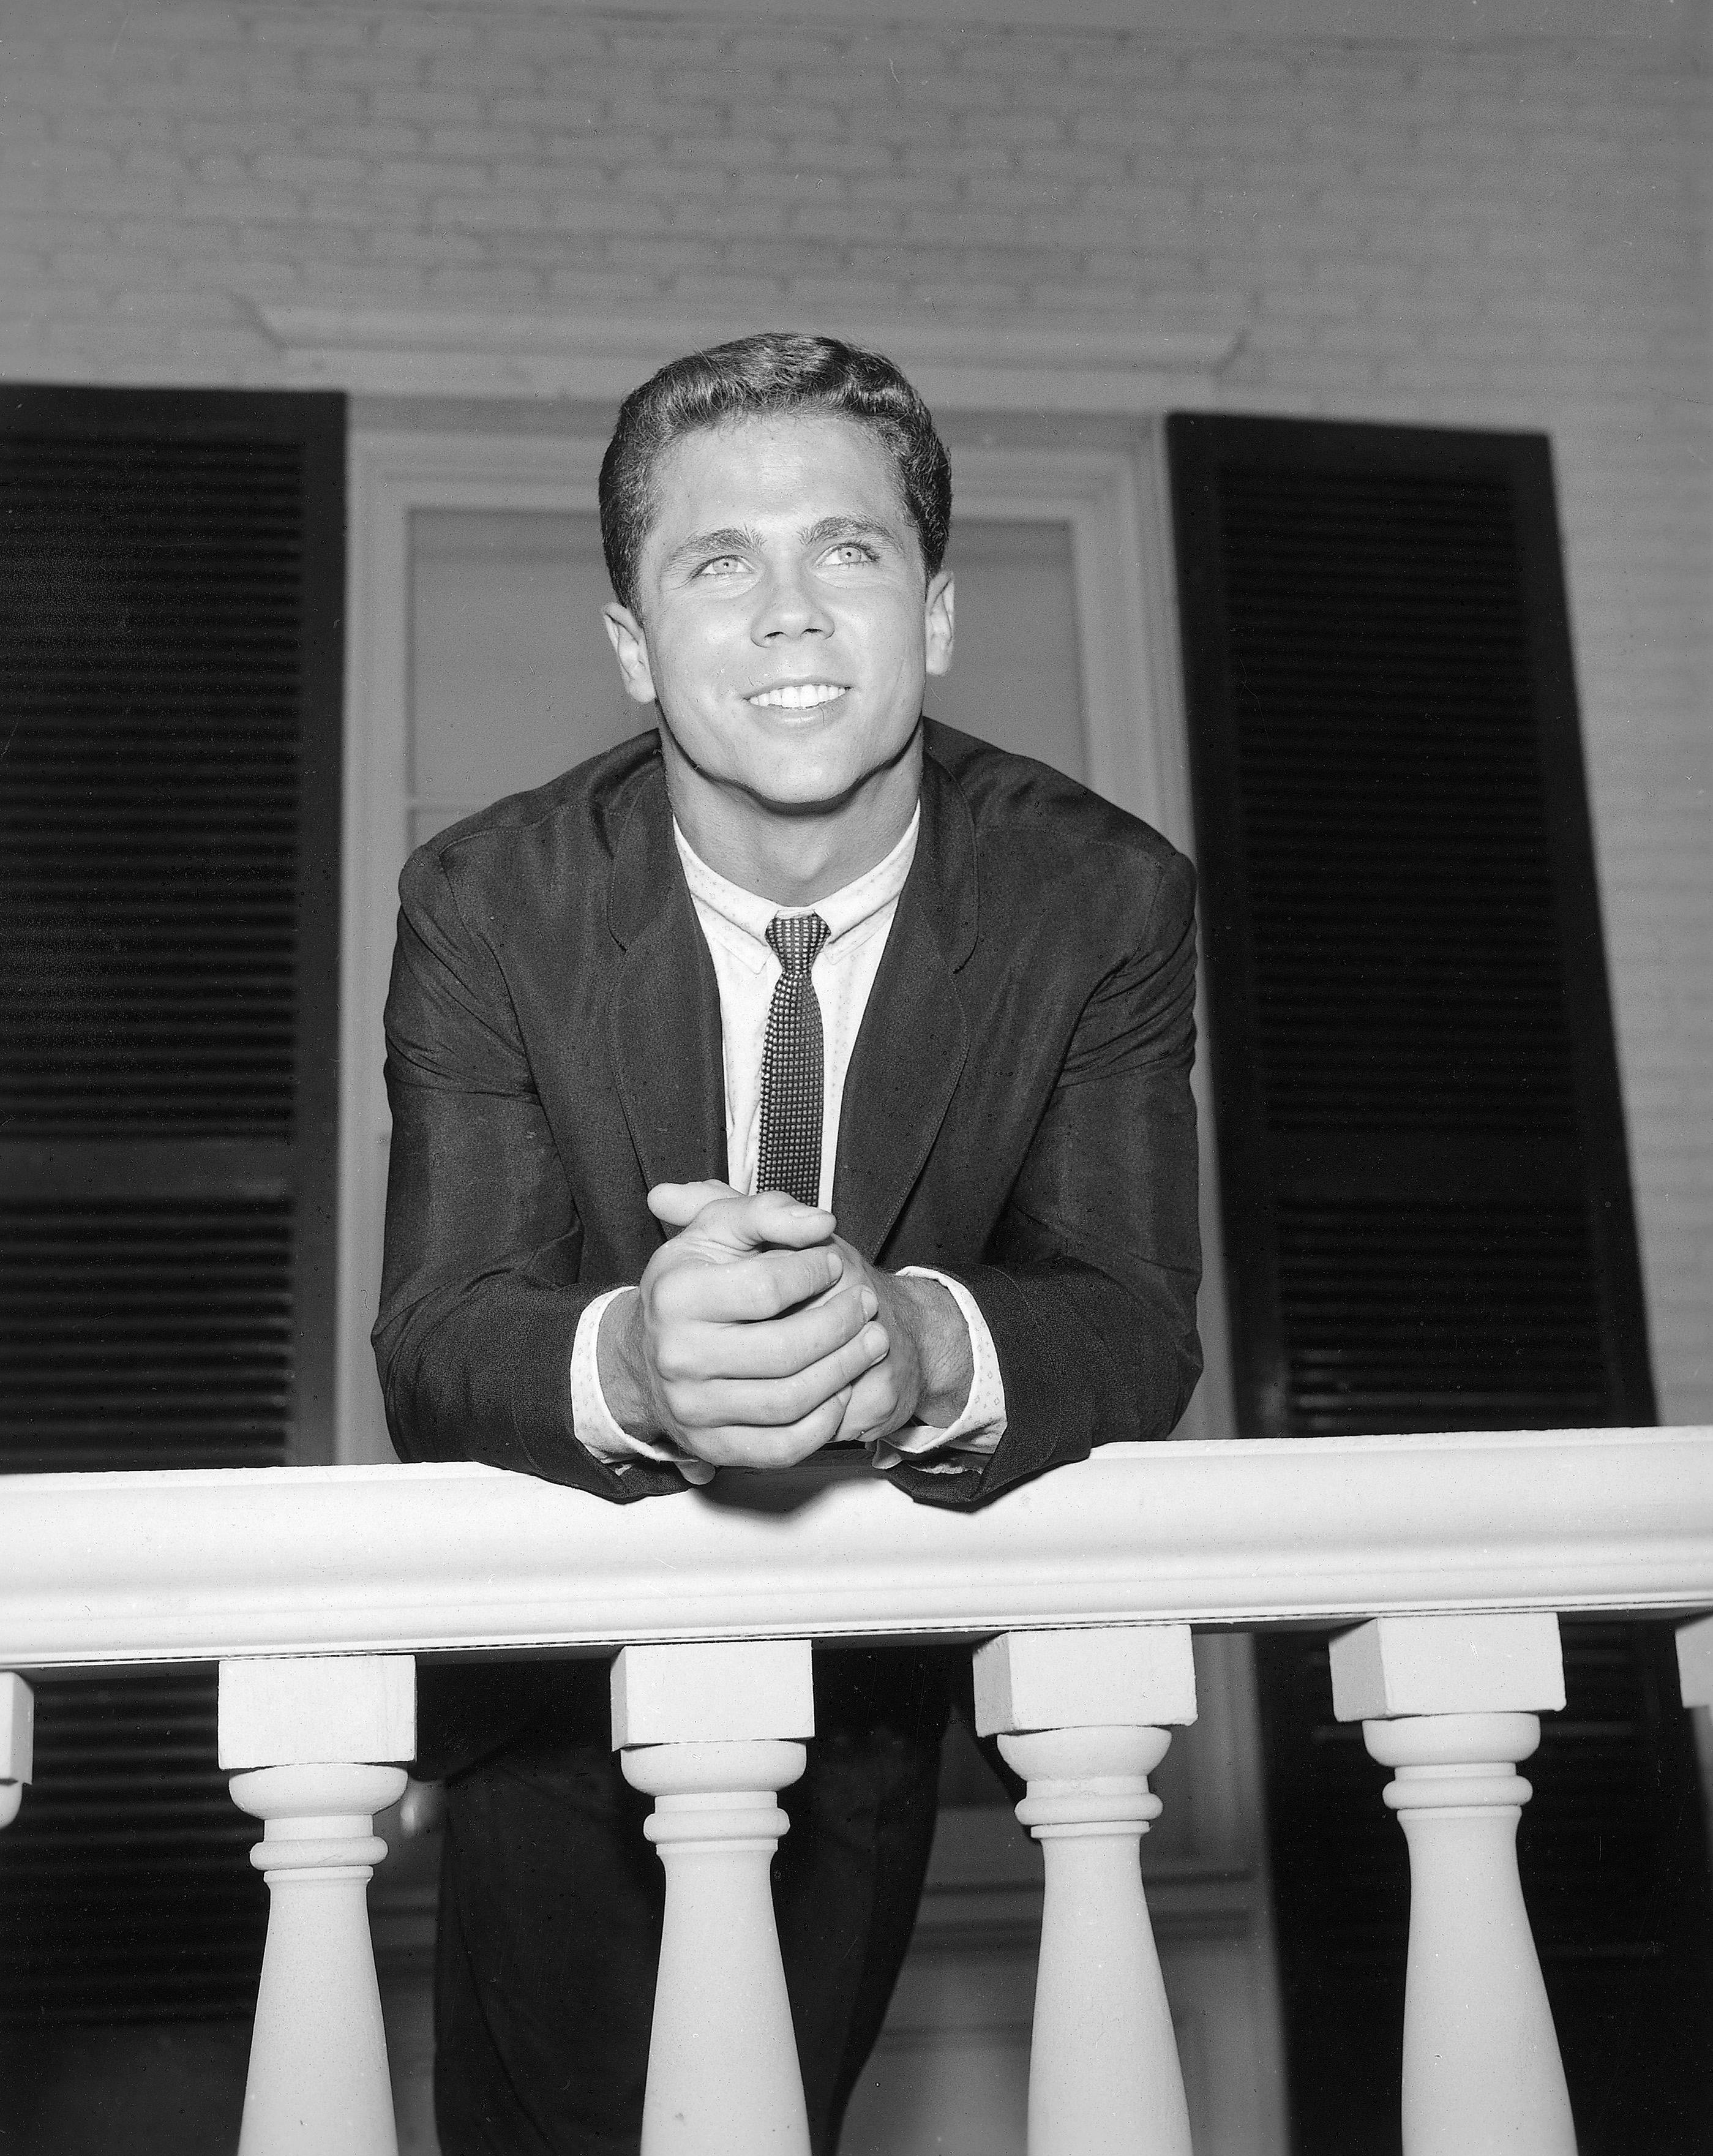 Tony Dow posing for a photo on "Leave it to Beaver" between the 1950s and the '60s. | Source: Getty Images